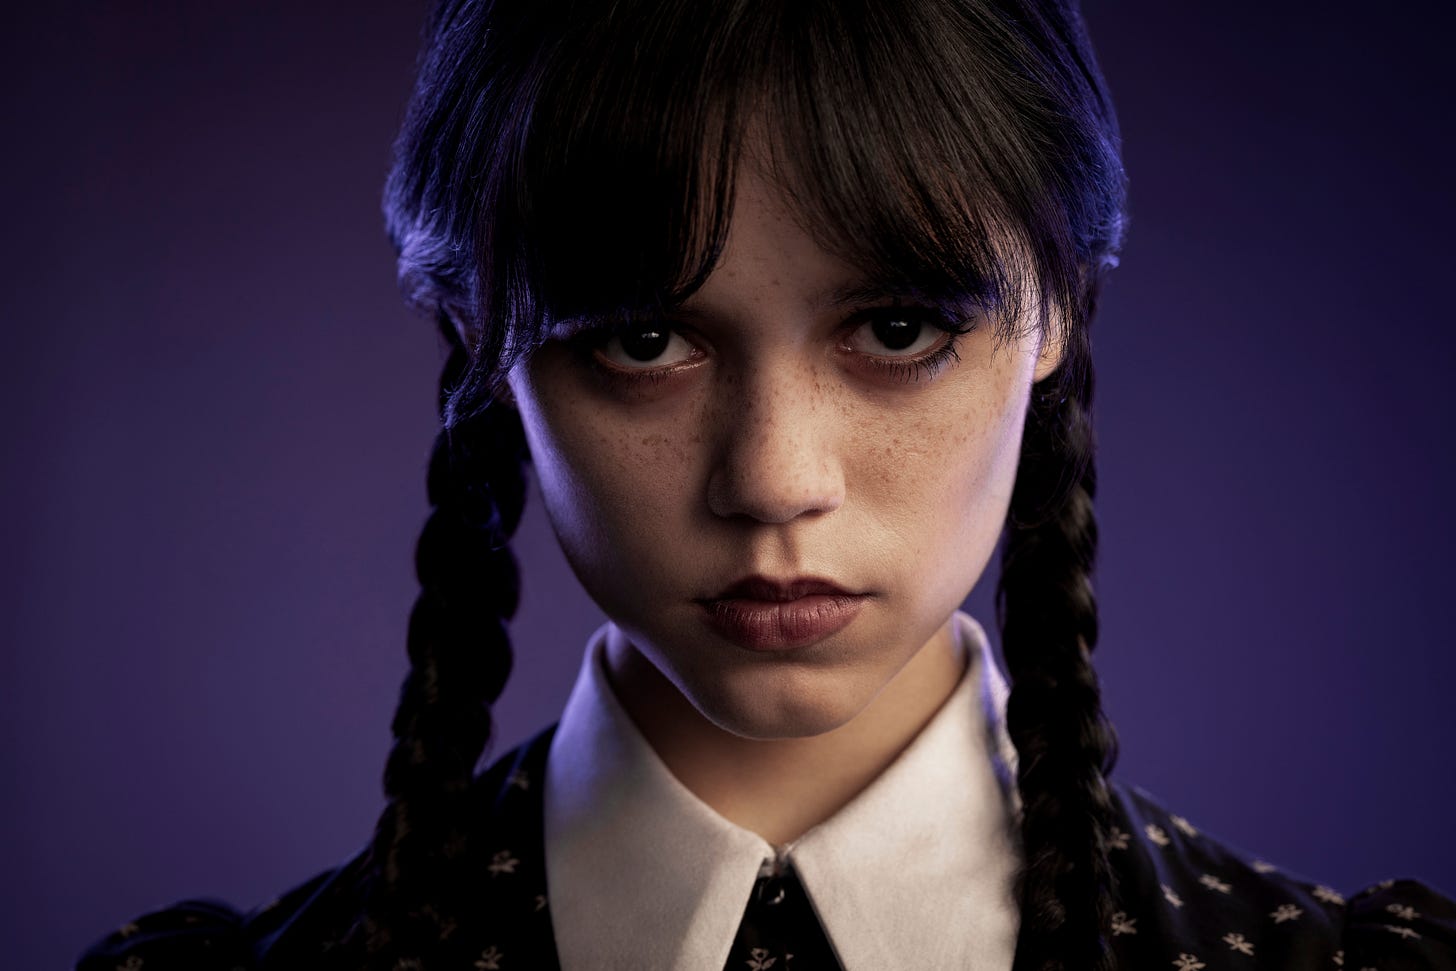 Picture of Jenna Ortega as Wednesday, with purple background and her in the trademark black braids and puritan style dress, looking deadpan at the camera